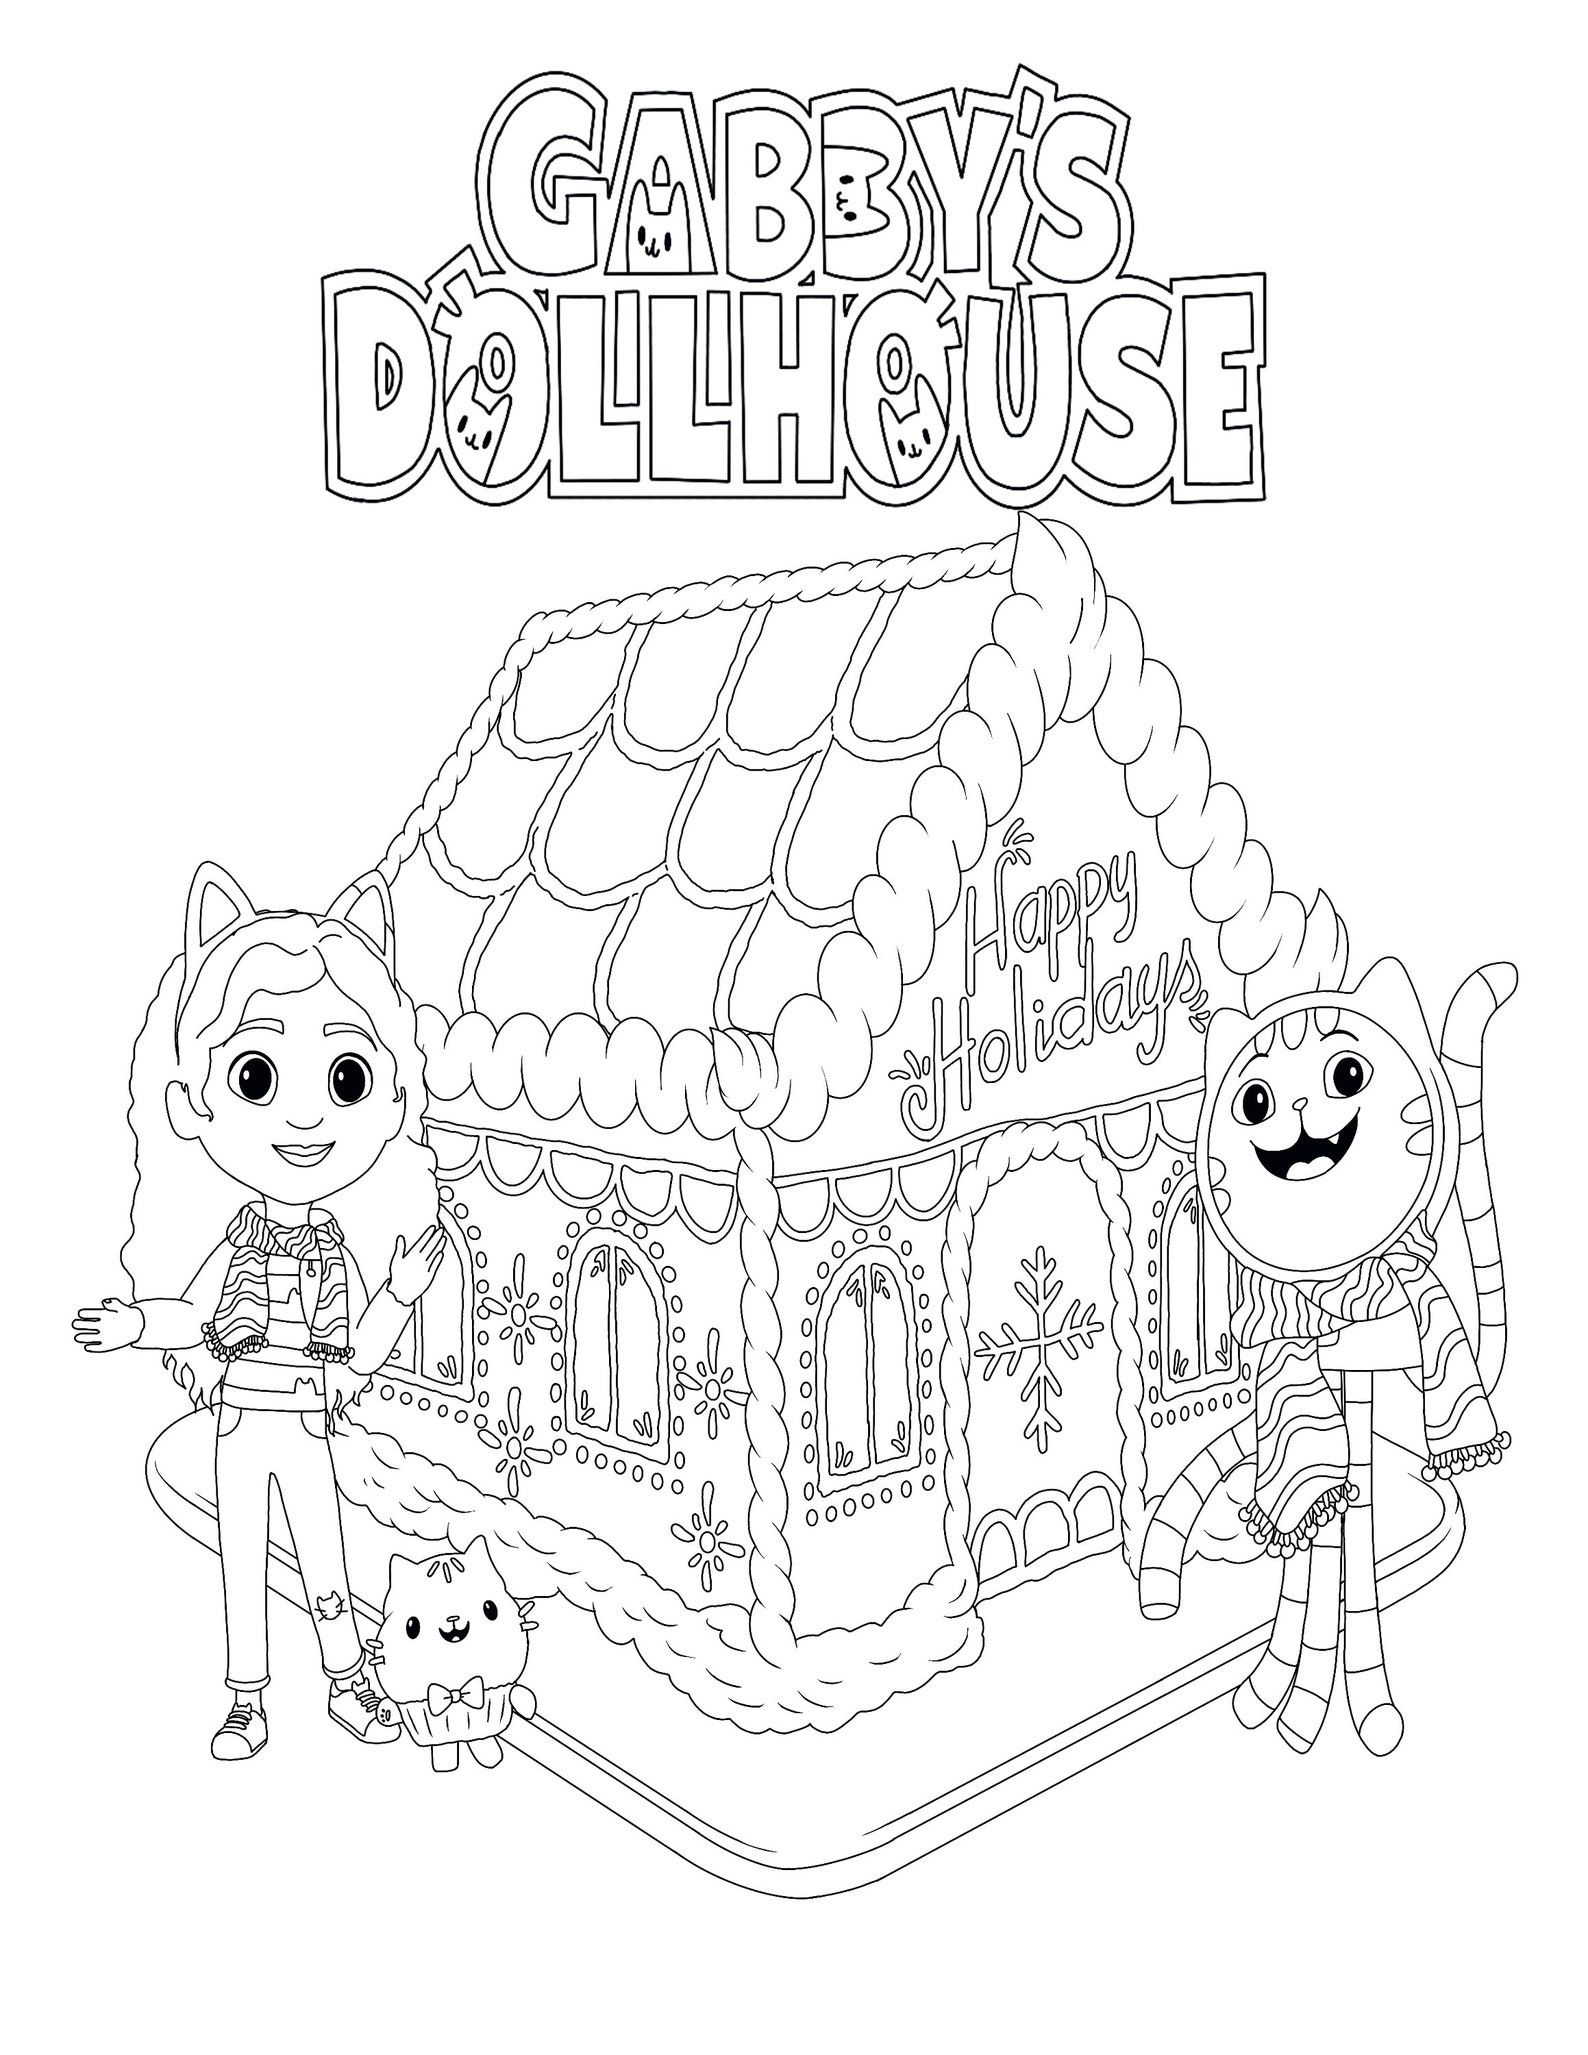 gabbys-dollhouse-holiday-coloring-page-printable-t-l-charger-etsy-france